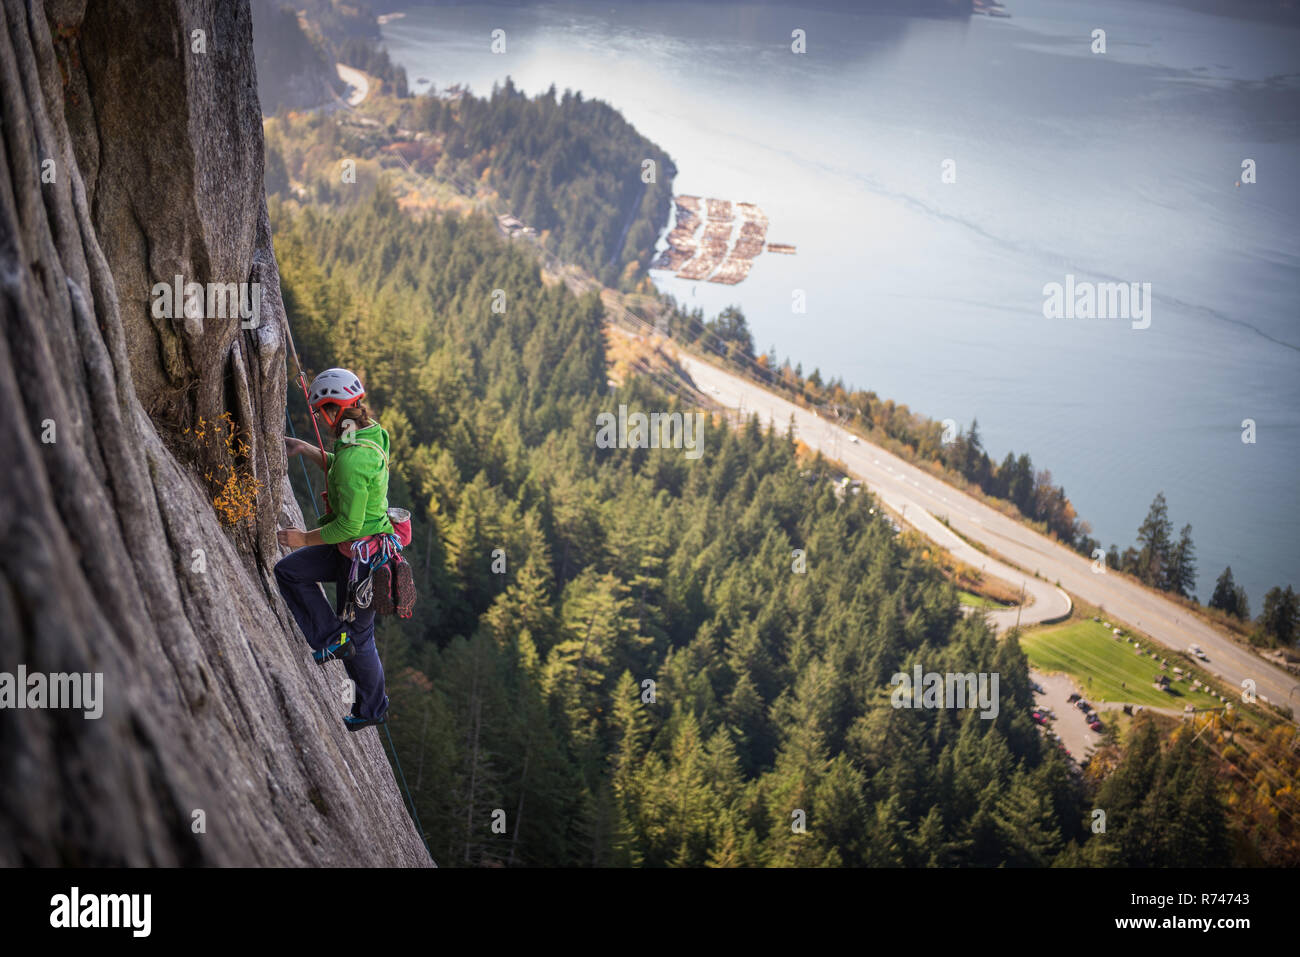 Young female rock climber climbing rock face, elevated view, The Chief, Squamish, British Columbia, Canada Stock Photo